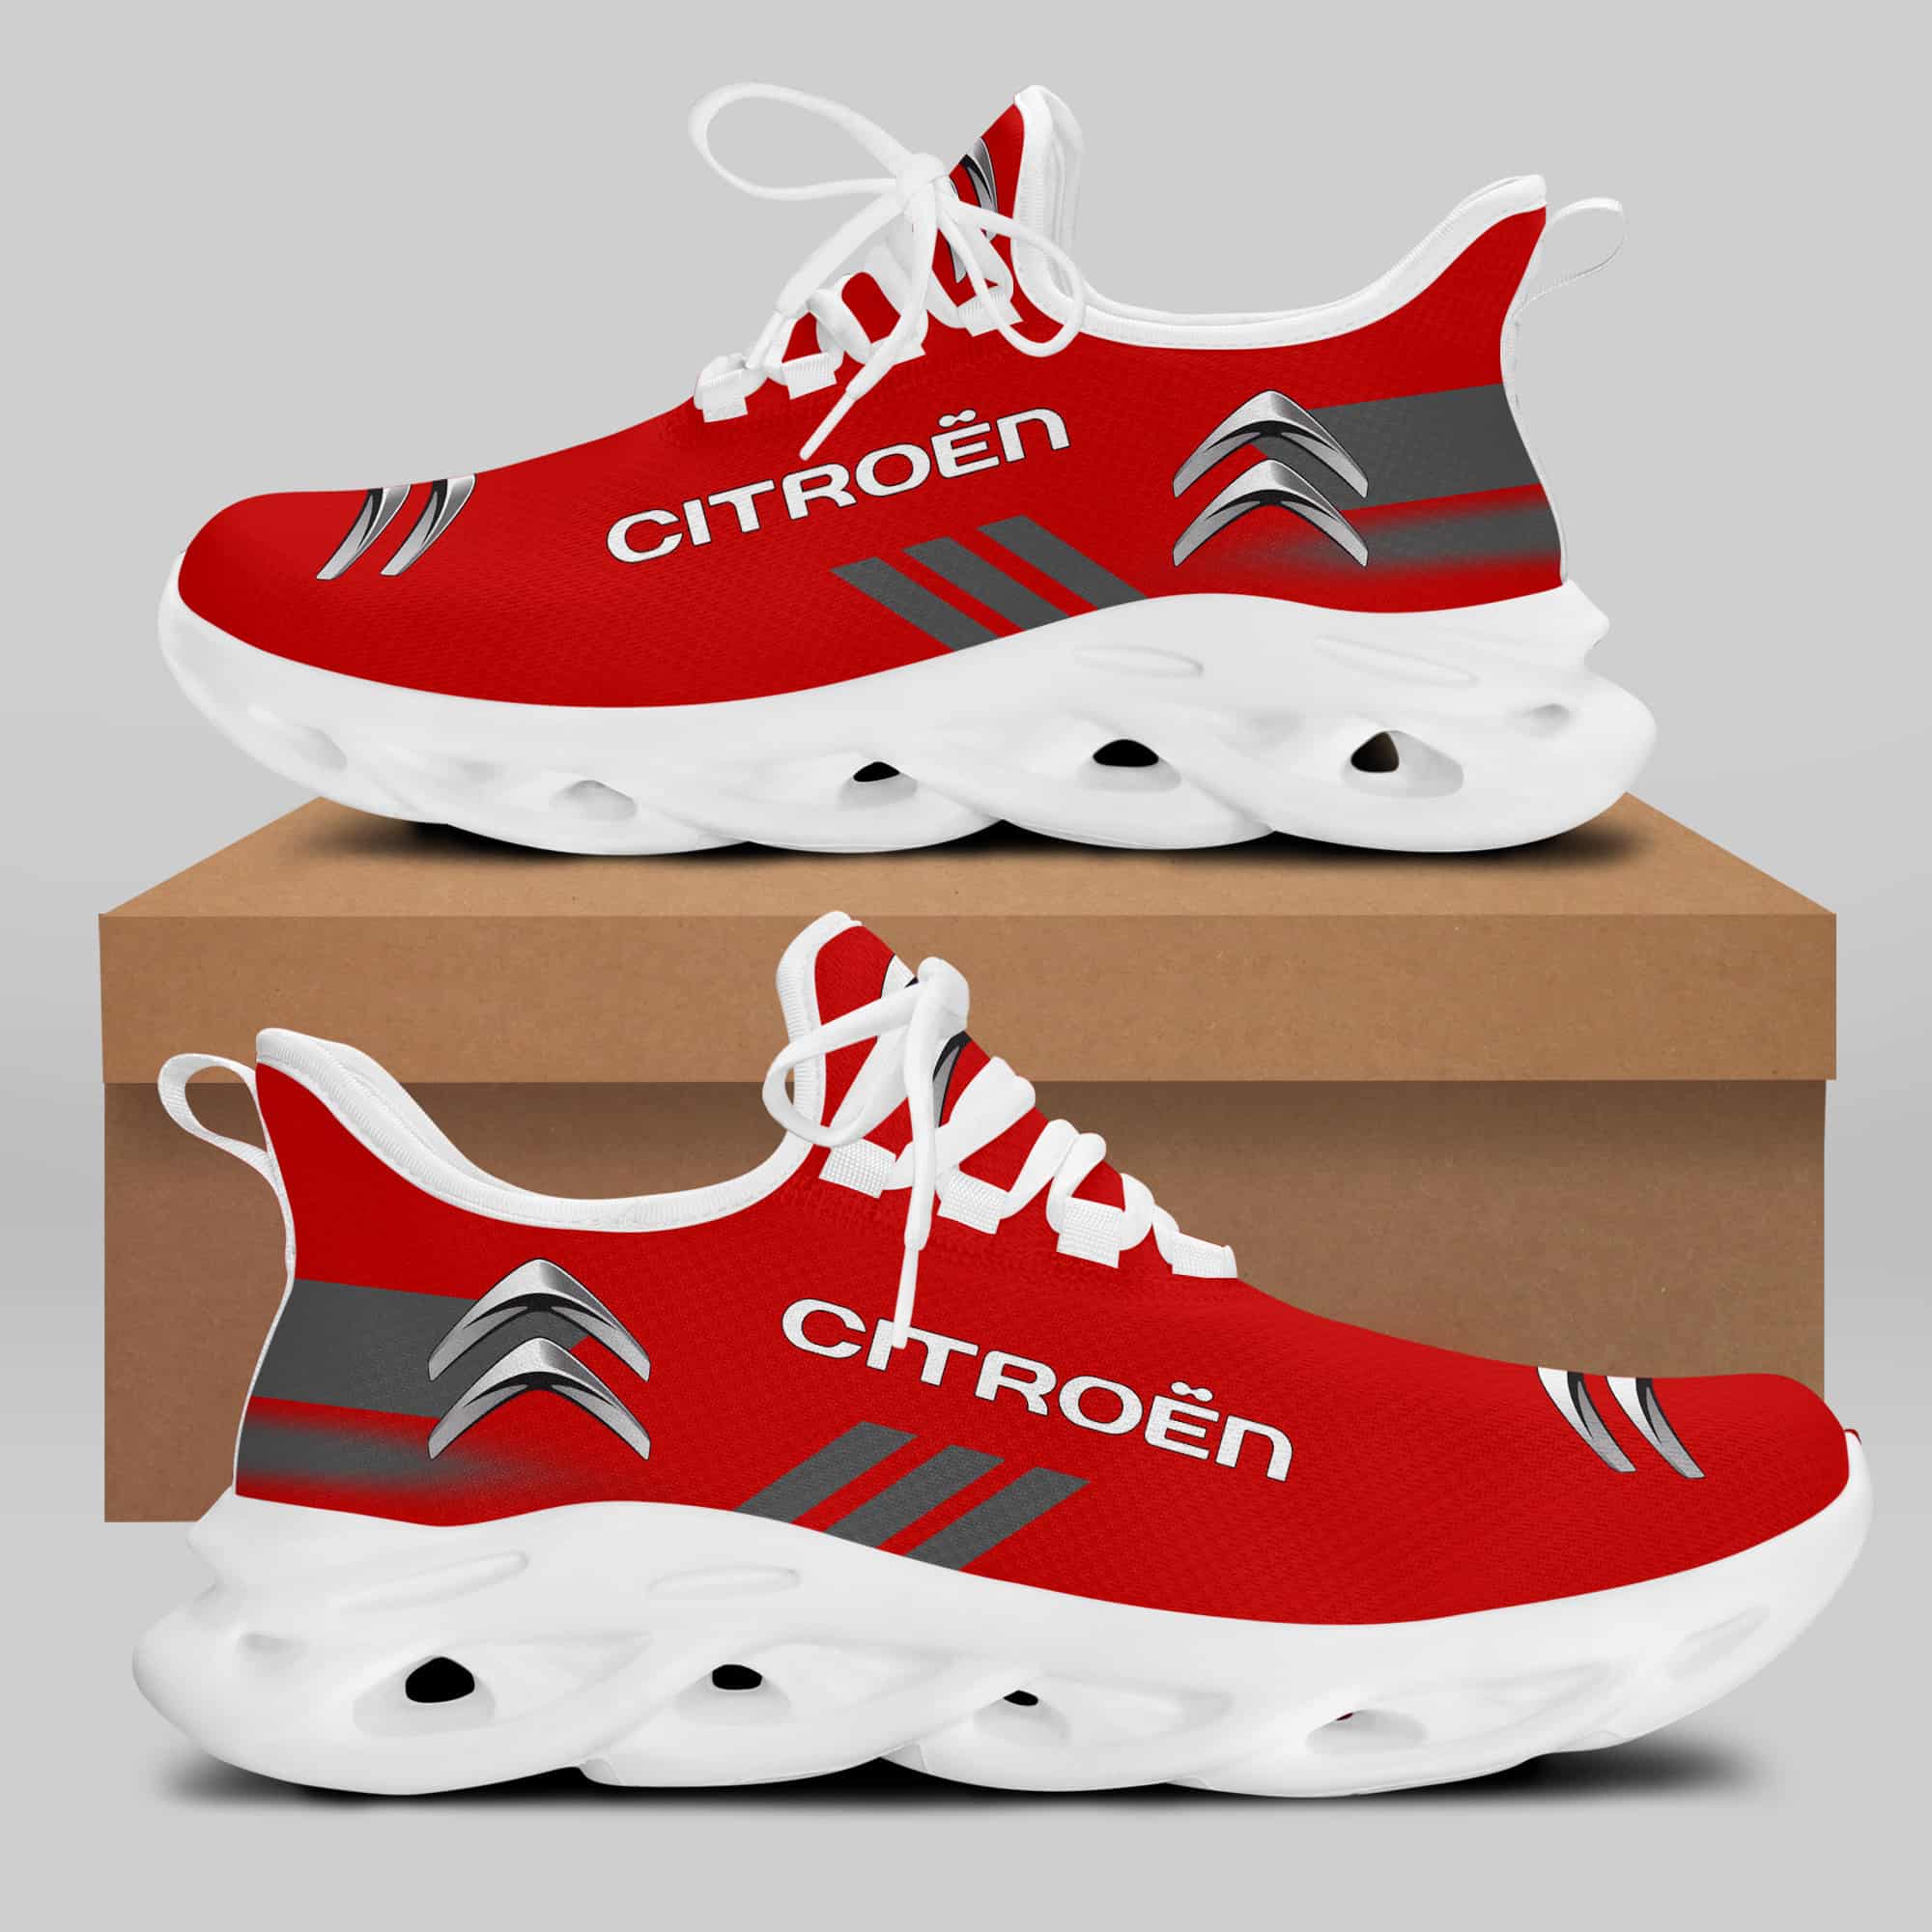 Citroën Running Shoes Max Soul Shoes Sneakers Ver 13 2